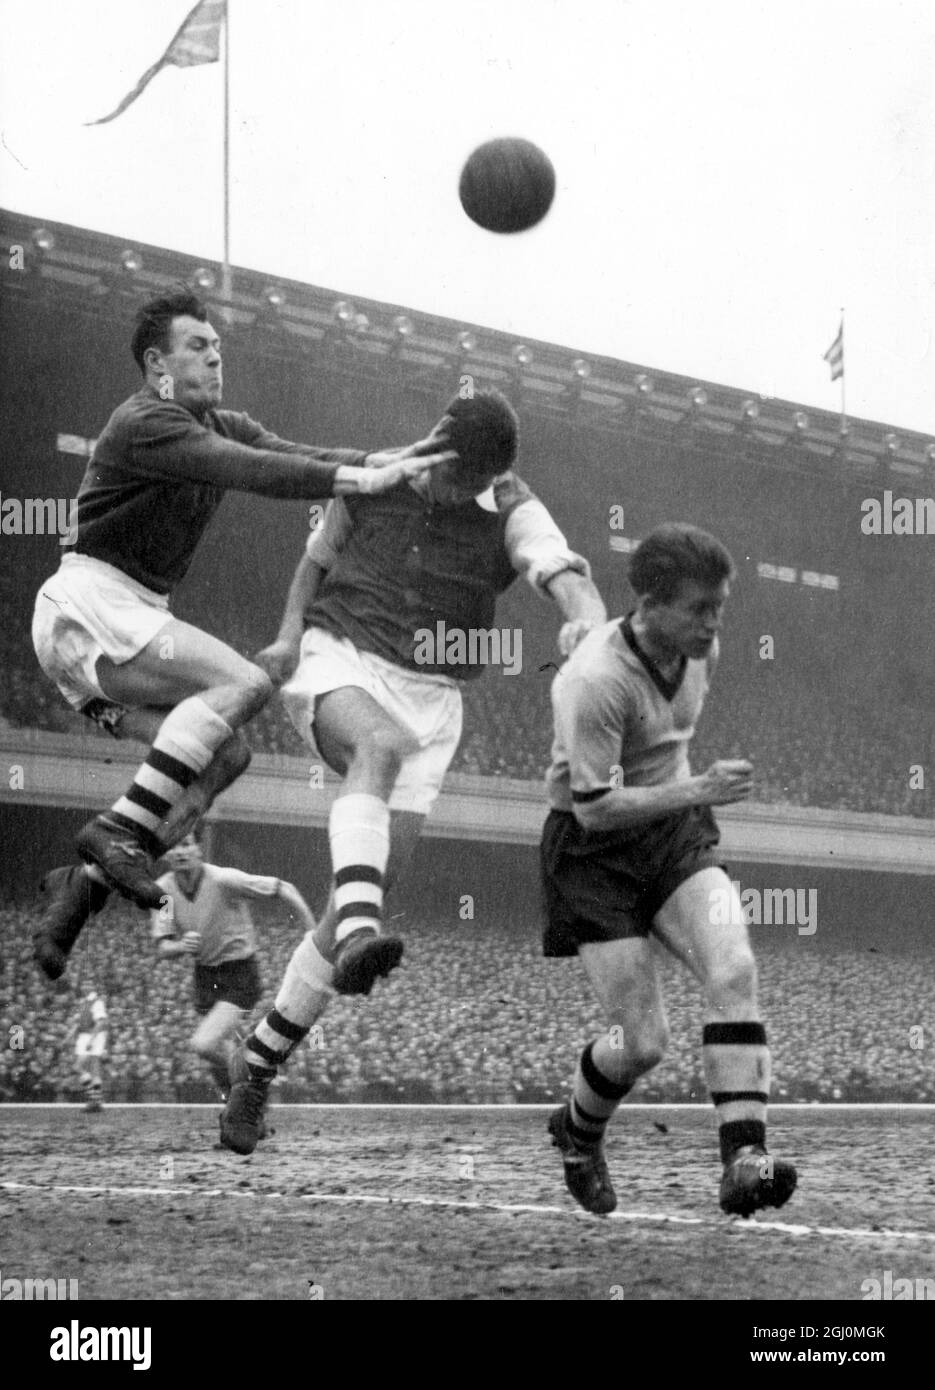 London England Arsenal at Highbury Vs Wolves who add two more points to their chances of winning the 1957-1958 Season League Championship . Kelsey of Arsenal punches clear centre Wills and wolves Deeley . 7 April 1958 Stock Photo